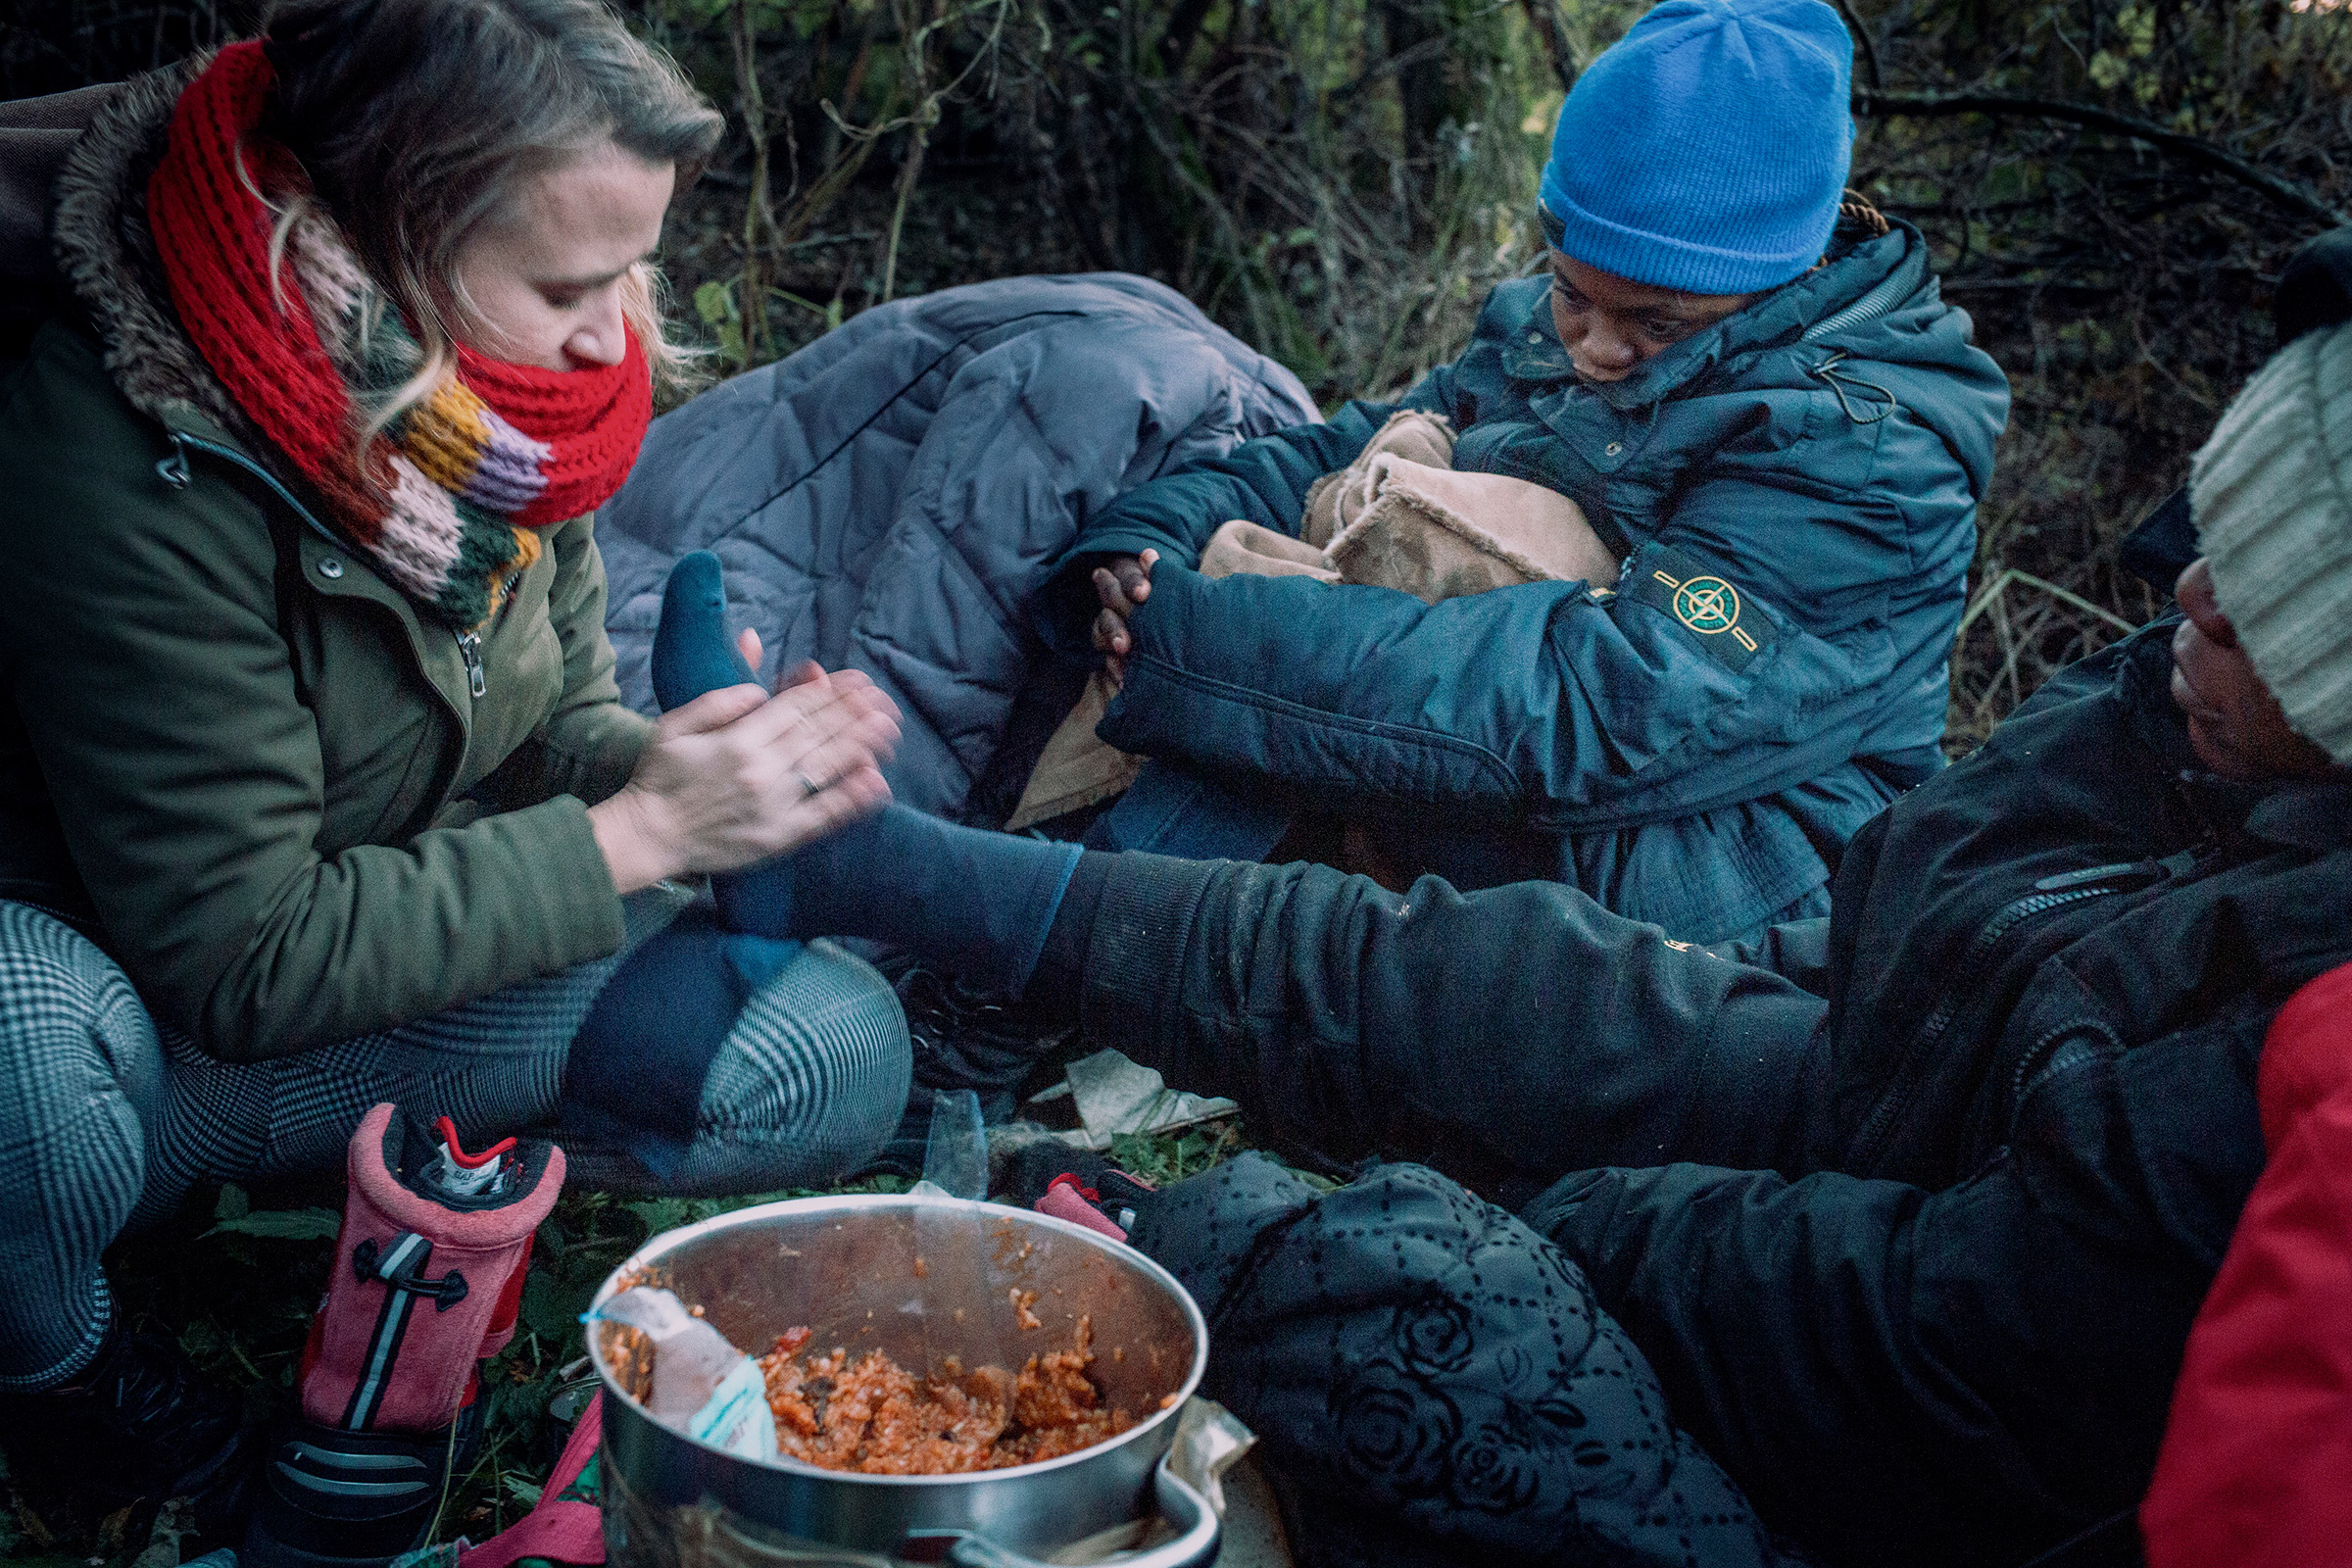 Anna Alboth left, with refugee women from Congo who had been hiding in the forest for 4 days near the Polish-Belarusian border. She is giving food, dry clothes and is warming their feet (Courtesy Thomas Alboth)